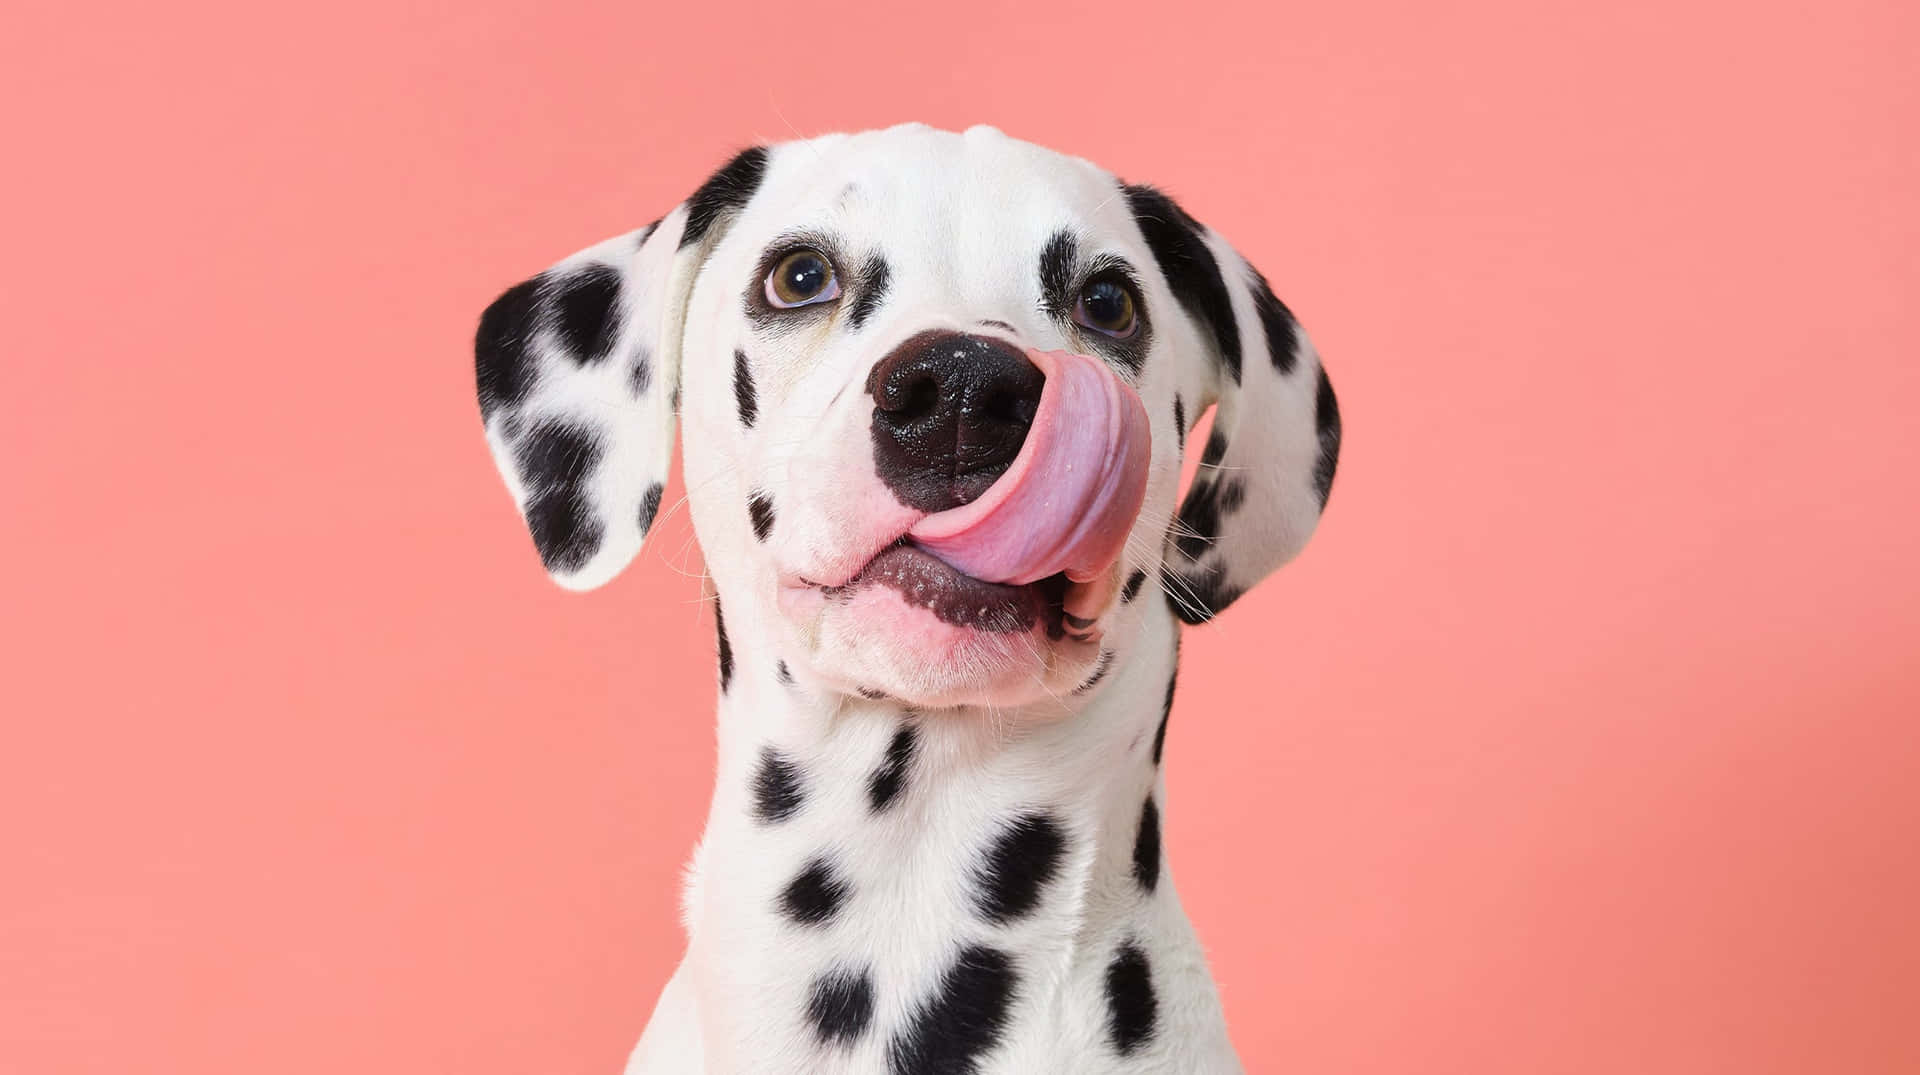 Beautiful Dalmatian with White Fur, Red Spots